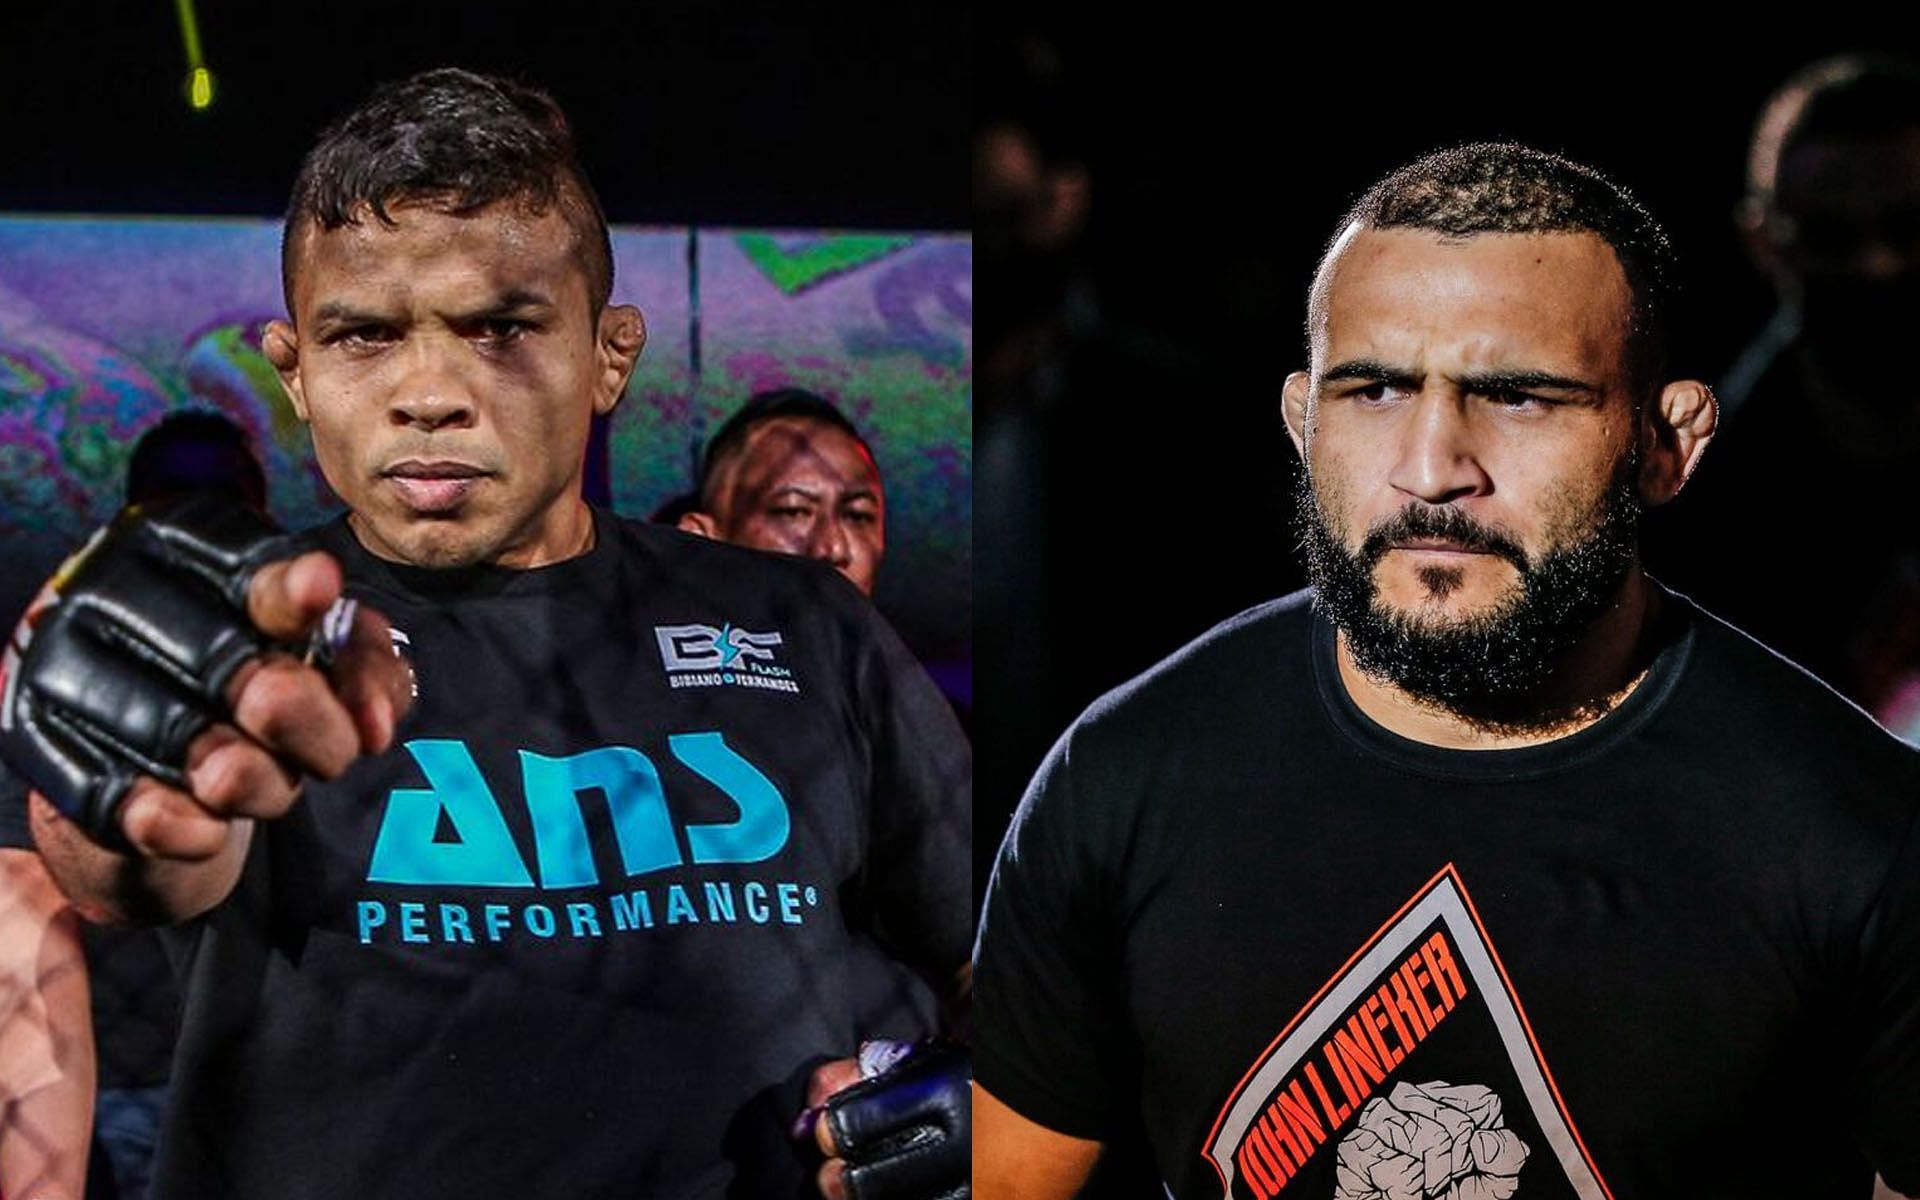 A few months have passed since Bibiano Fernandes (Left) and John Lineker (Right) had a faceoff, but their feelings have not changed. | [Photo: ONE Championship]